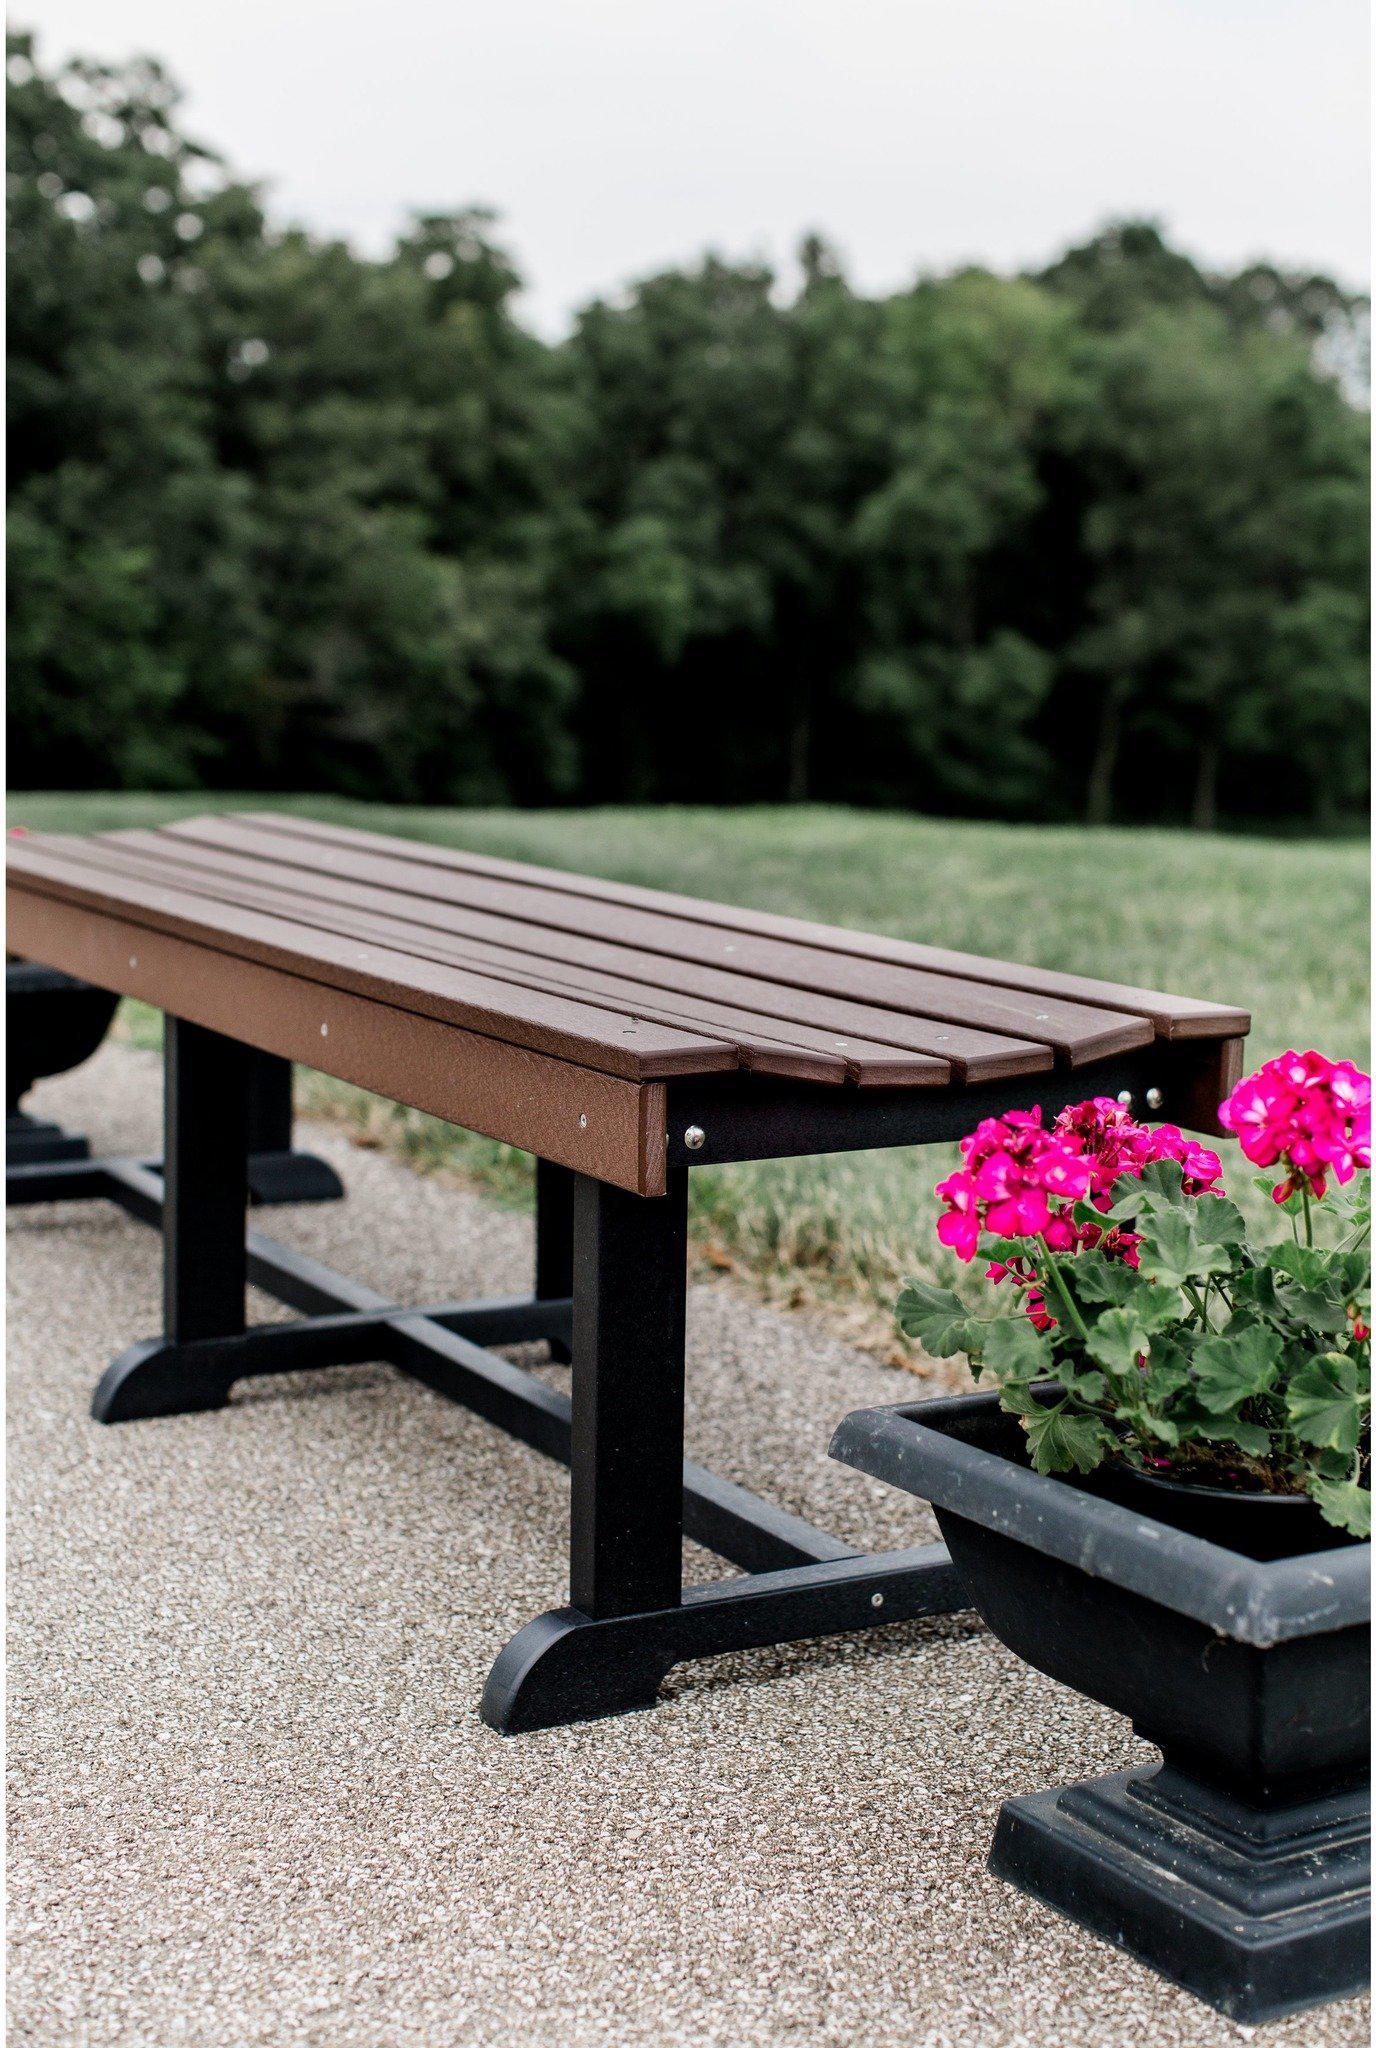 Wildridge Outdoor Heritage Recycled Plastic 68" Patio Bench - LEAD TIME TO SHIP 3 WEEKS